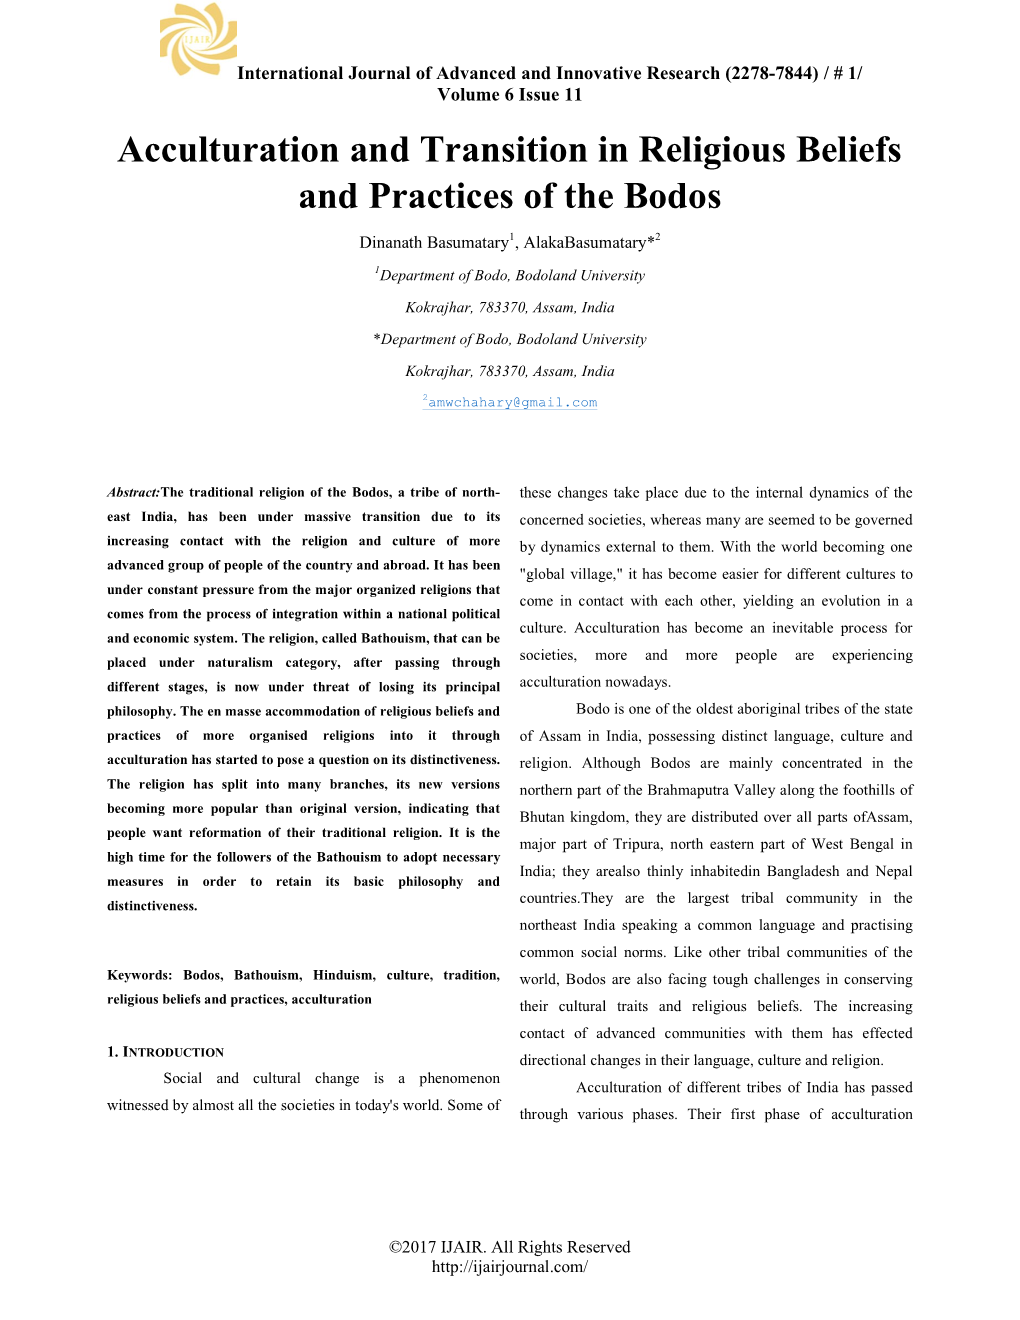 Acculturation and Transition in Religious Beliefs and Practices of the Bodos